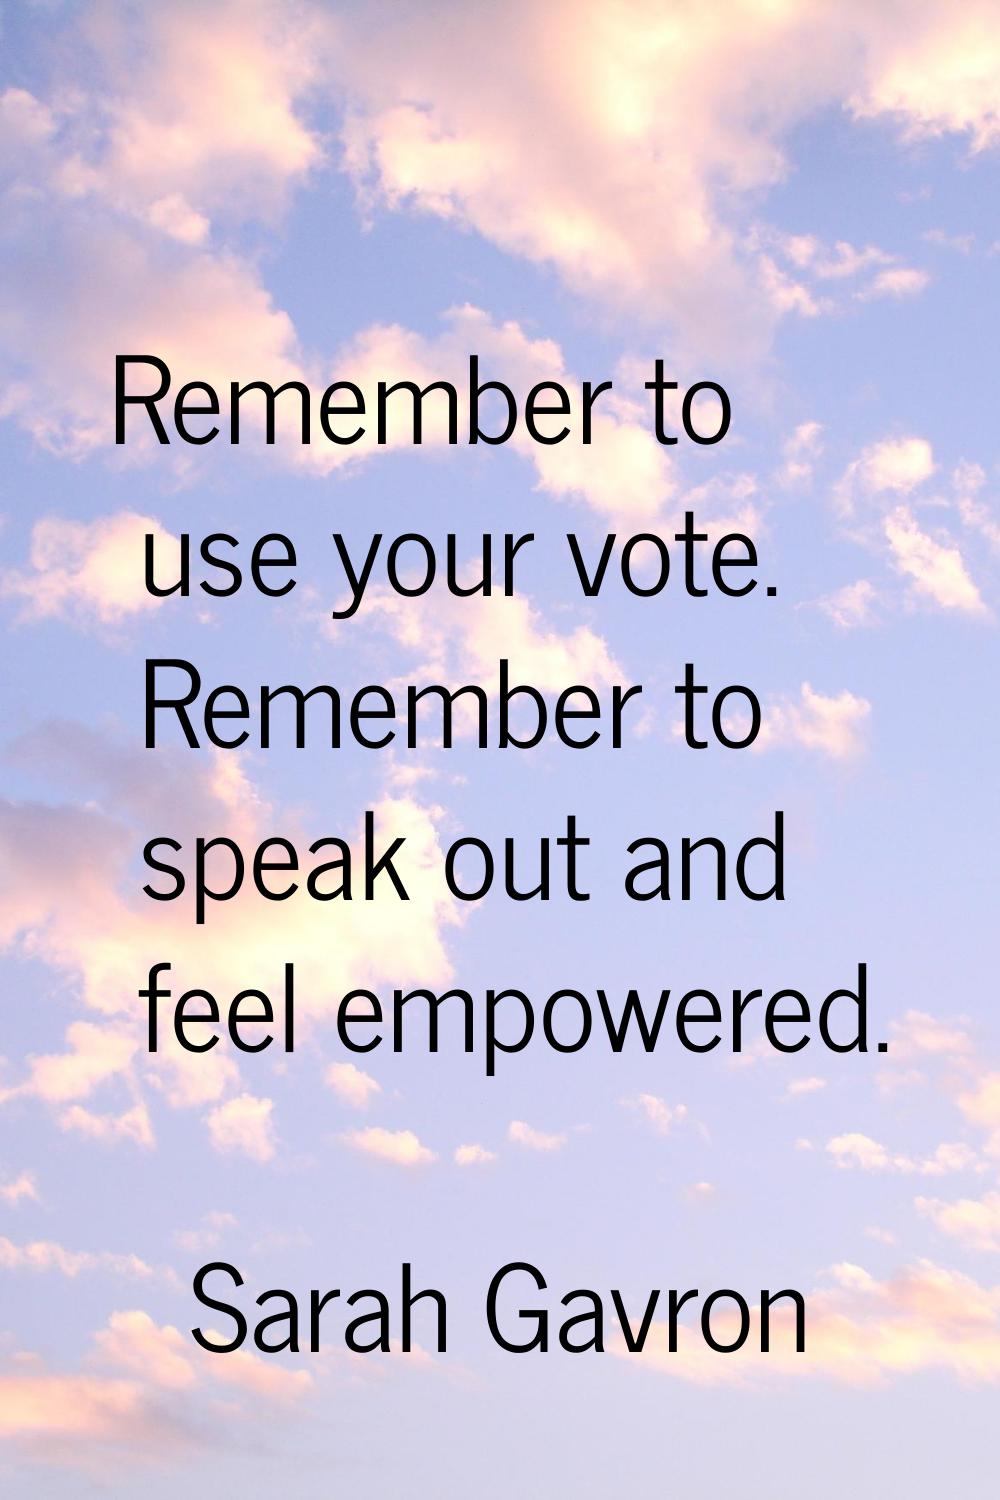 Remember to use your vote. Remember to speak out and feel empowered.